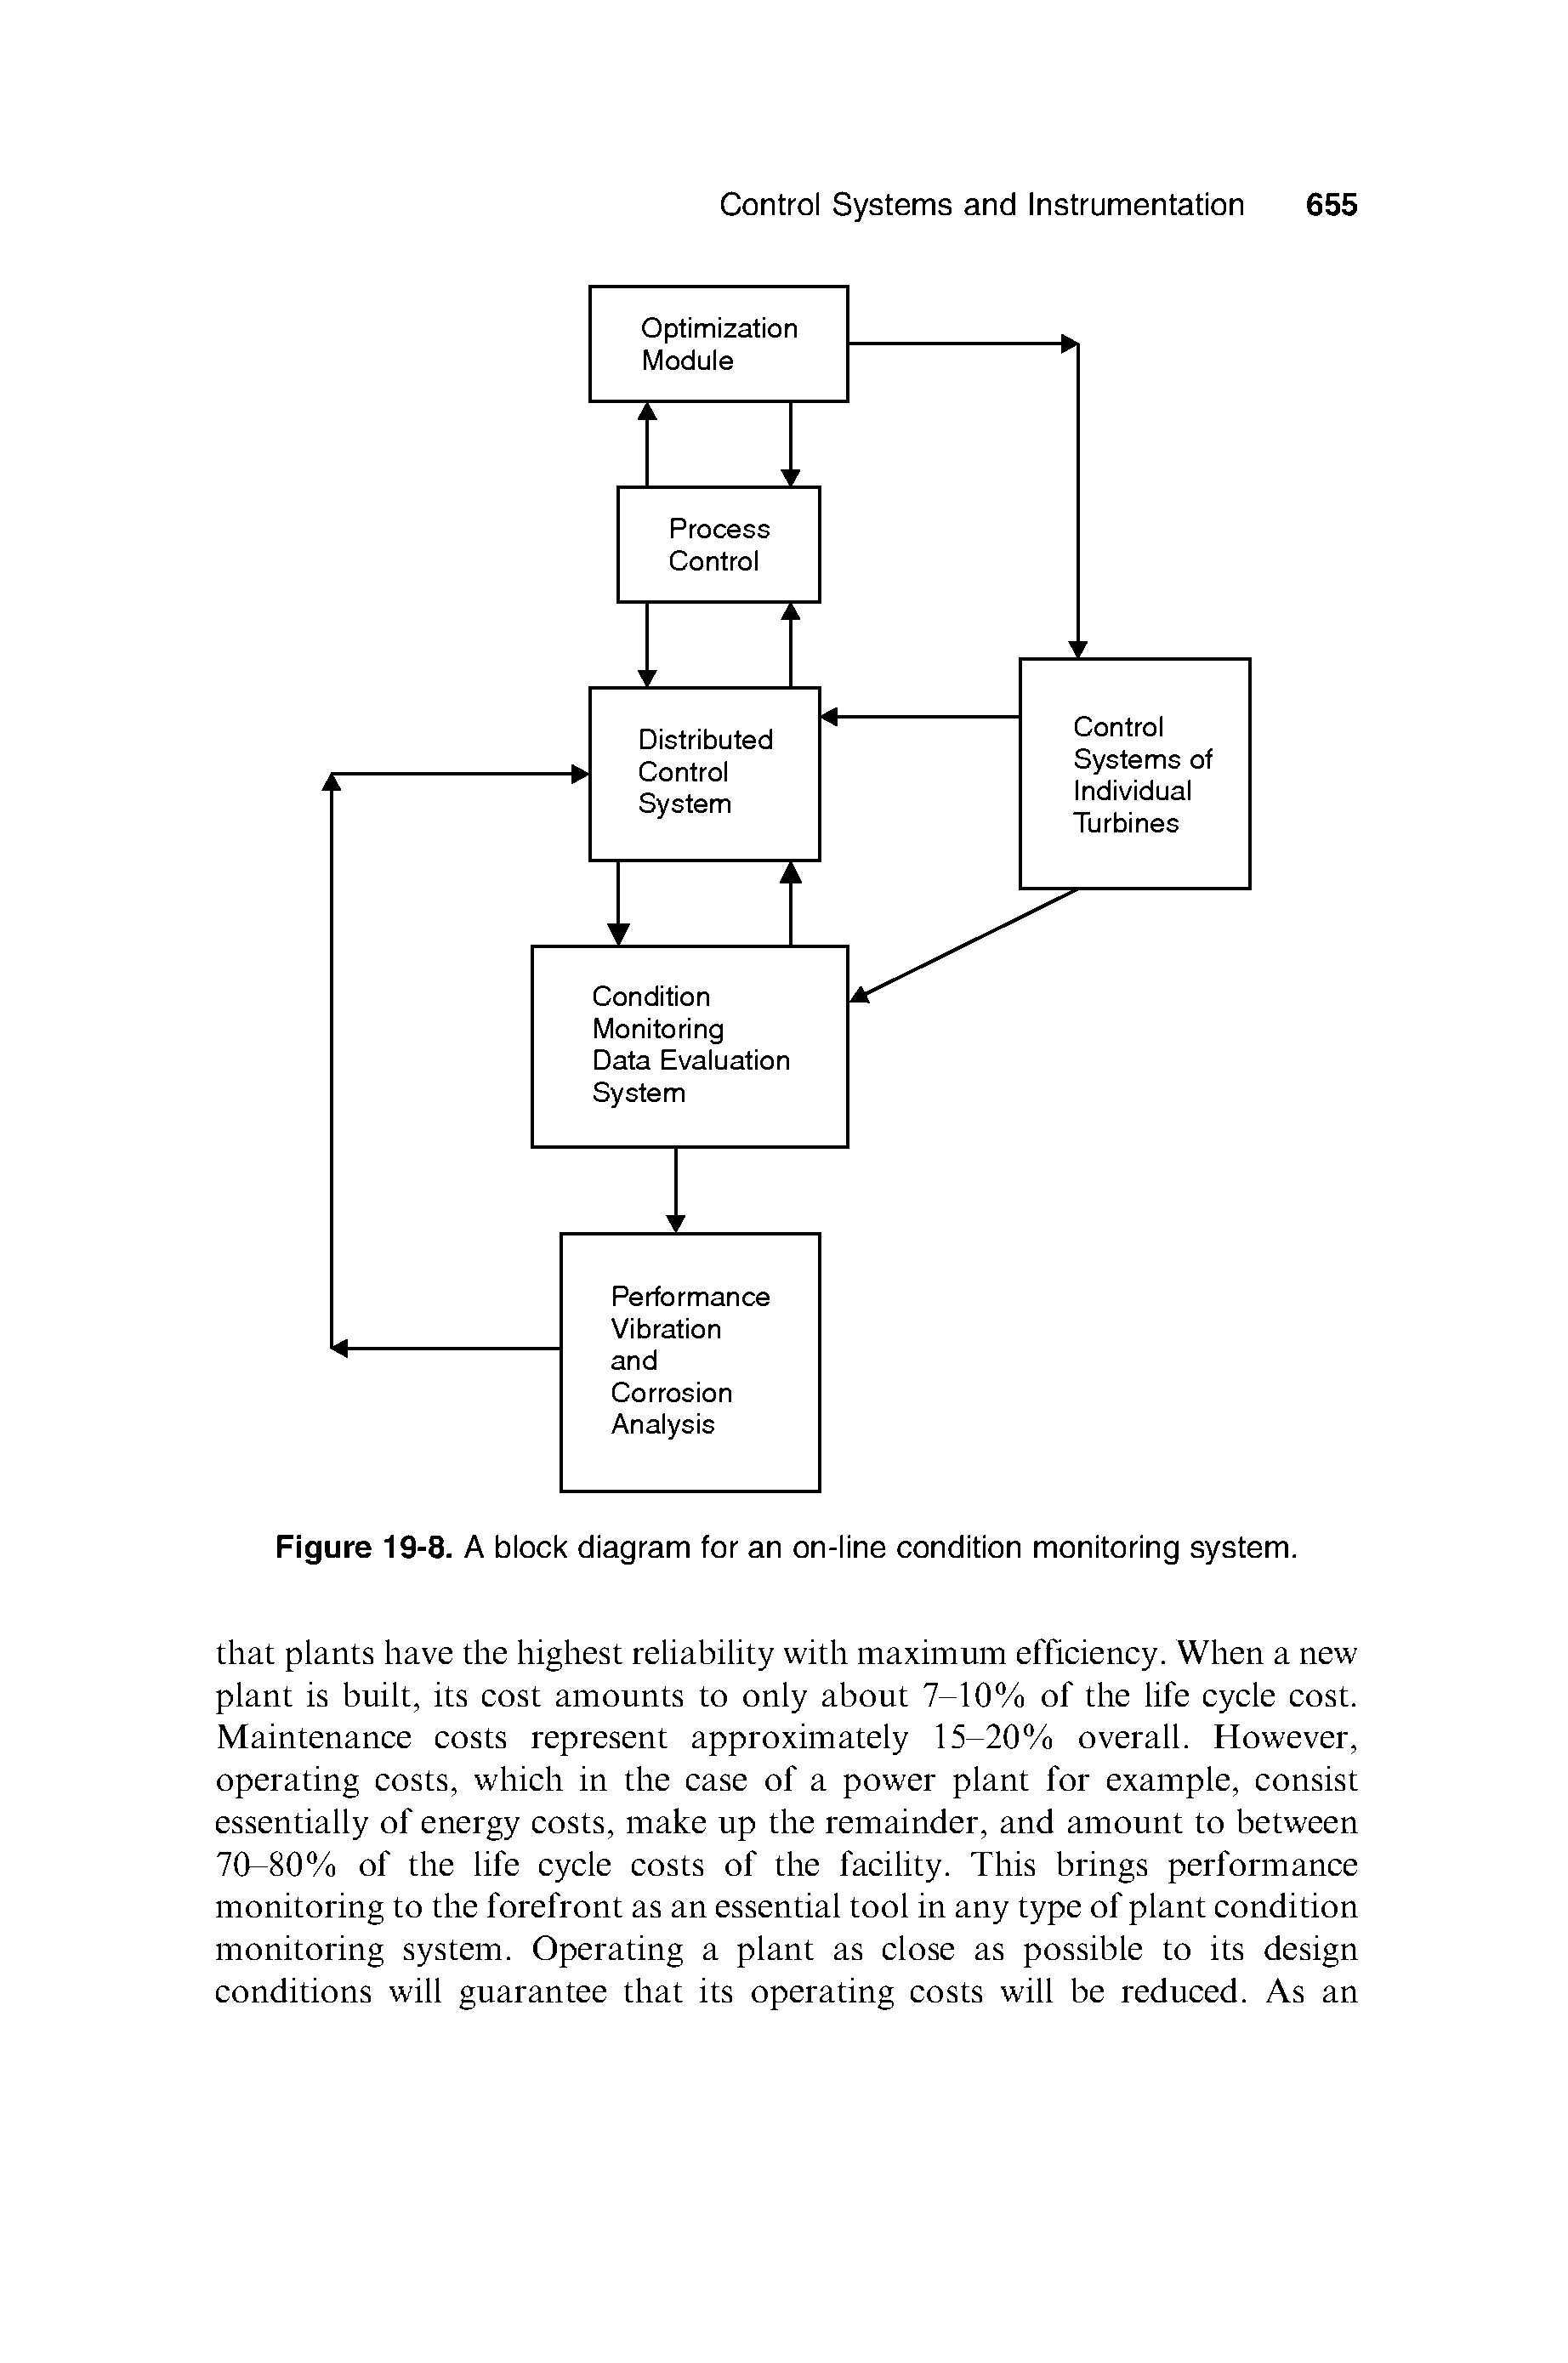 Figure 19-8. A block diagram for an on-line condition monitoring system.